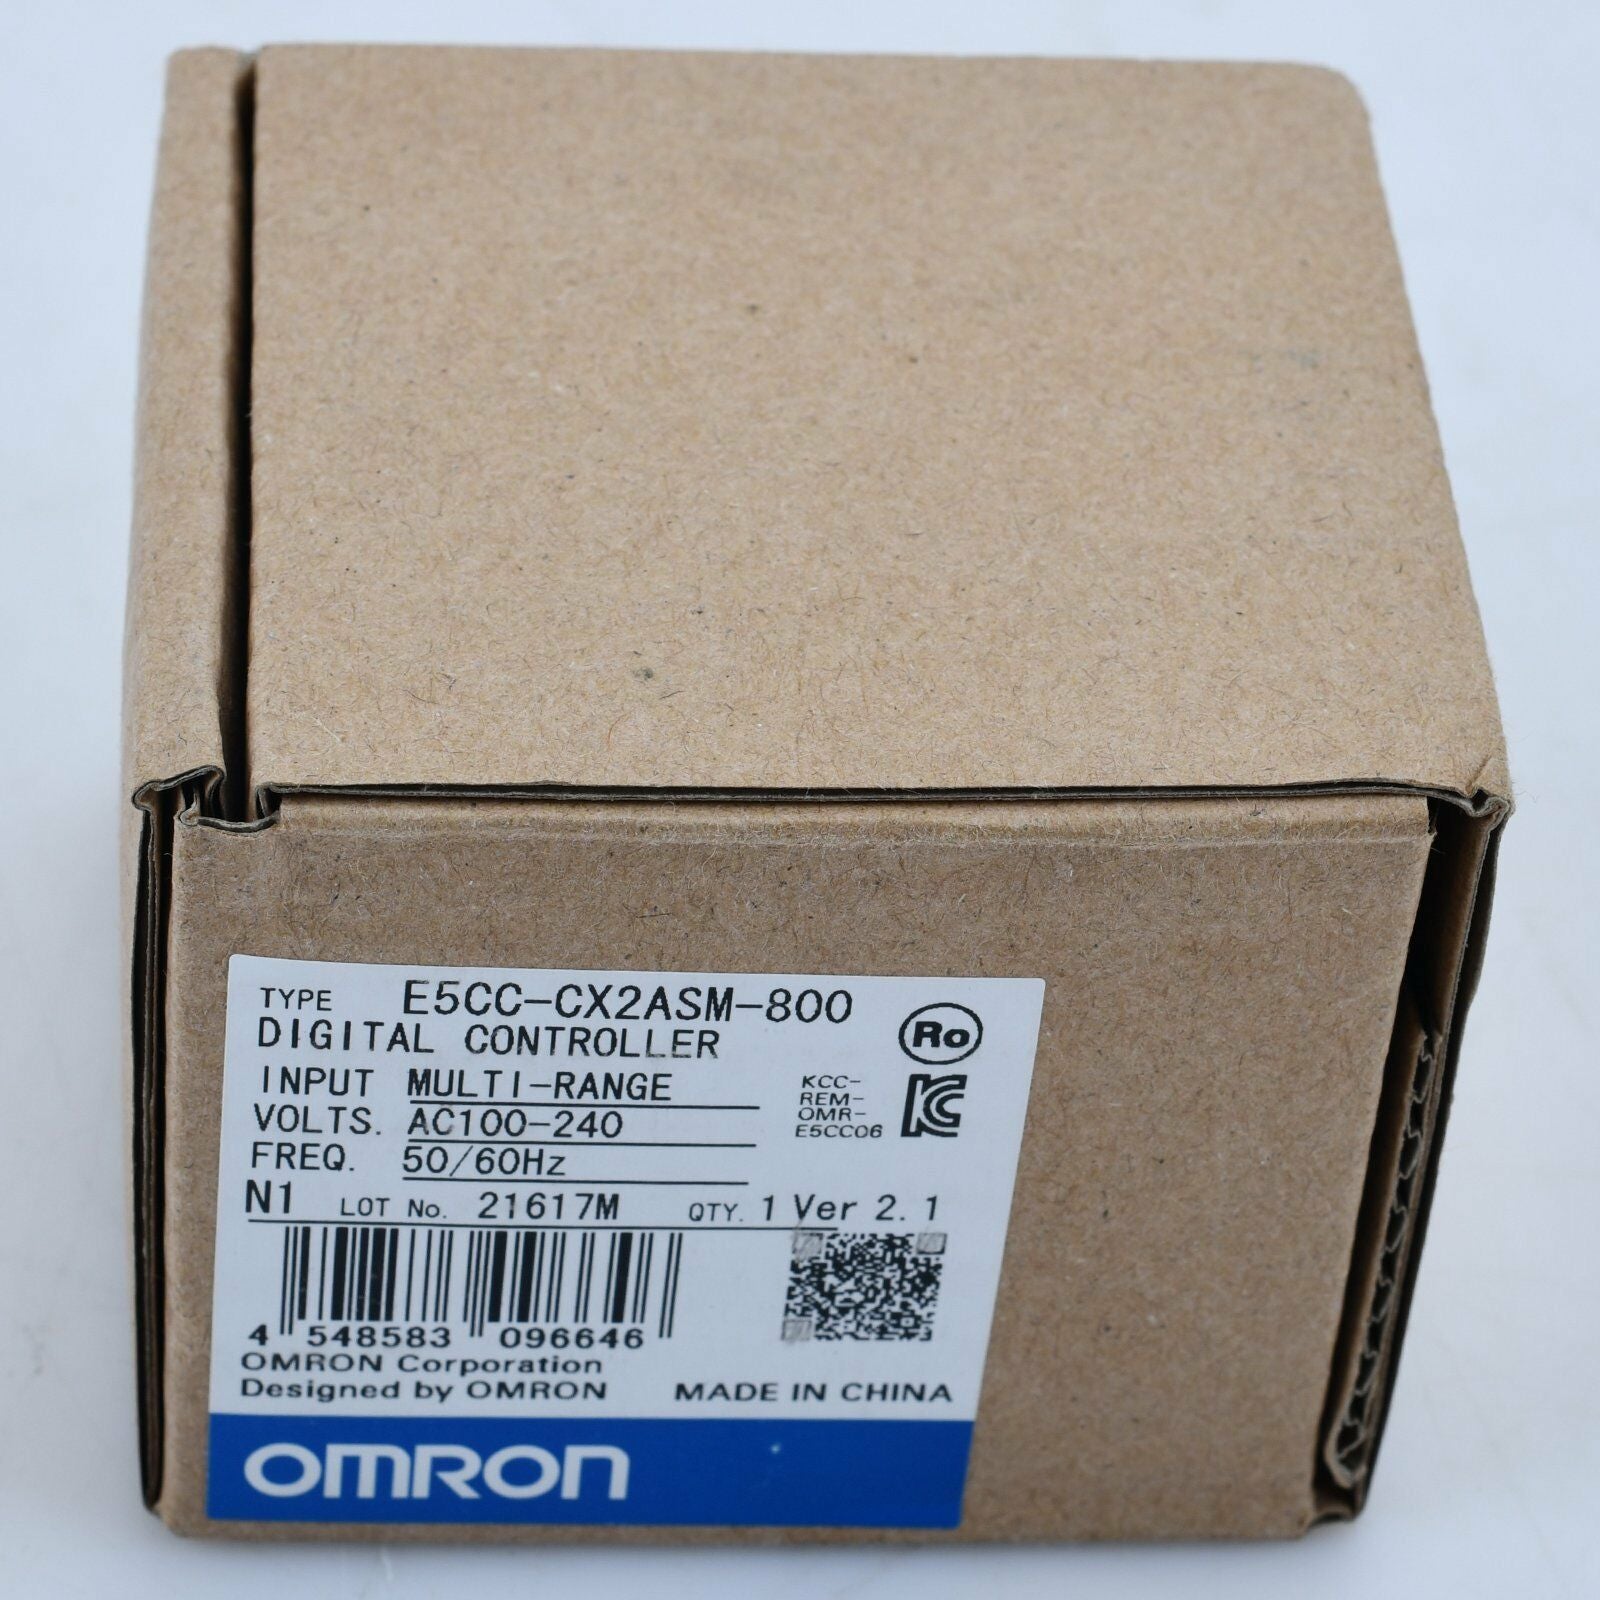 E5CCCX2ASM800 KOEED 101-200, 80%, import_2020_10_10_031751, Omron, Other